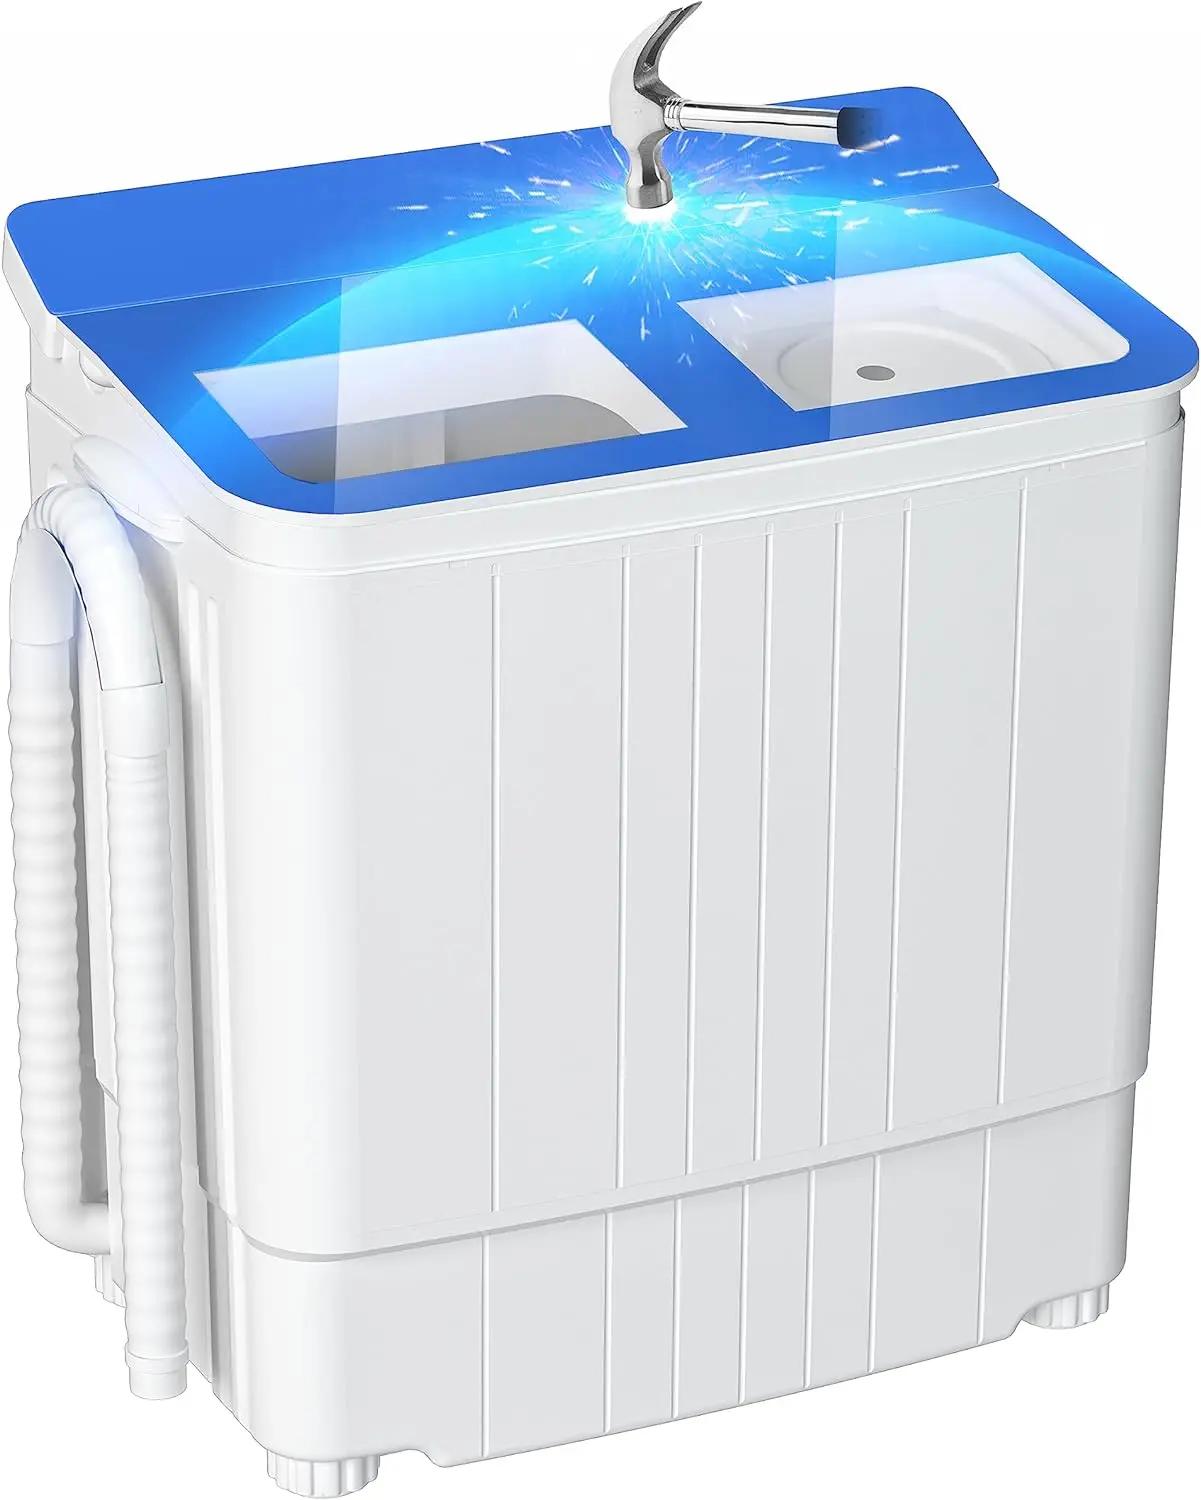 Portable Washer and Dryer, 17.6LBS Small Washing Machine and Spin Dryer ... - $583.24